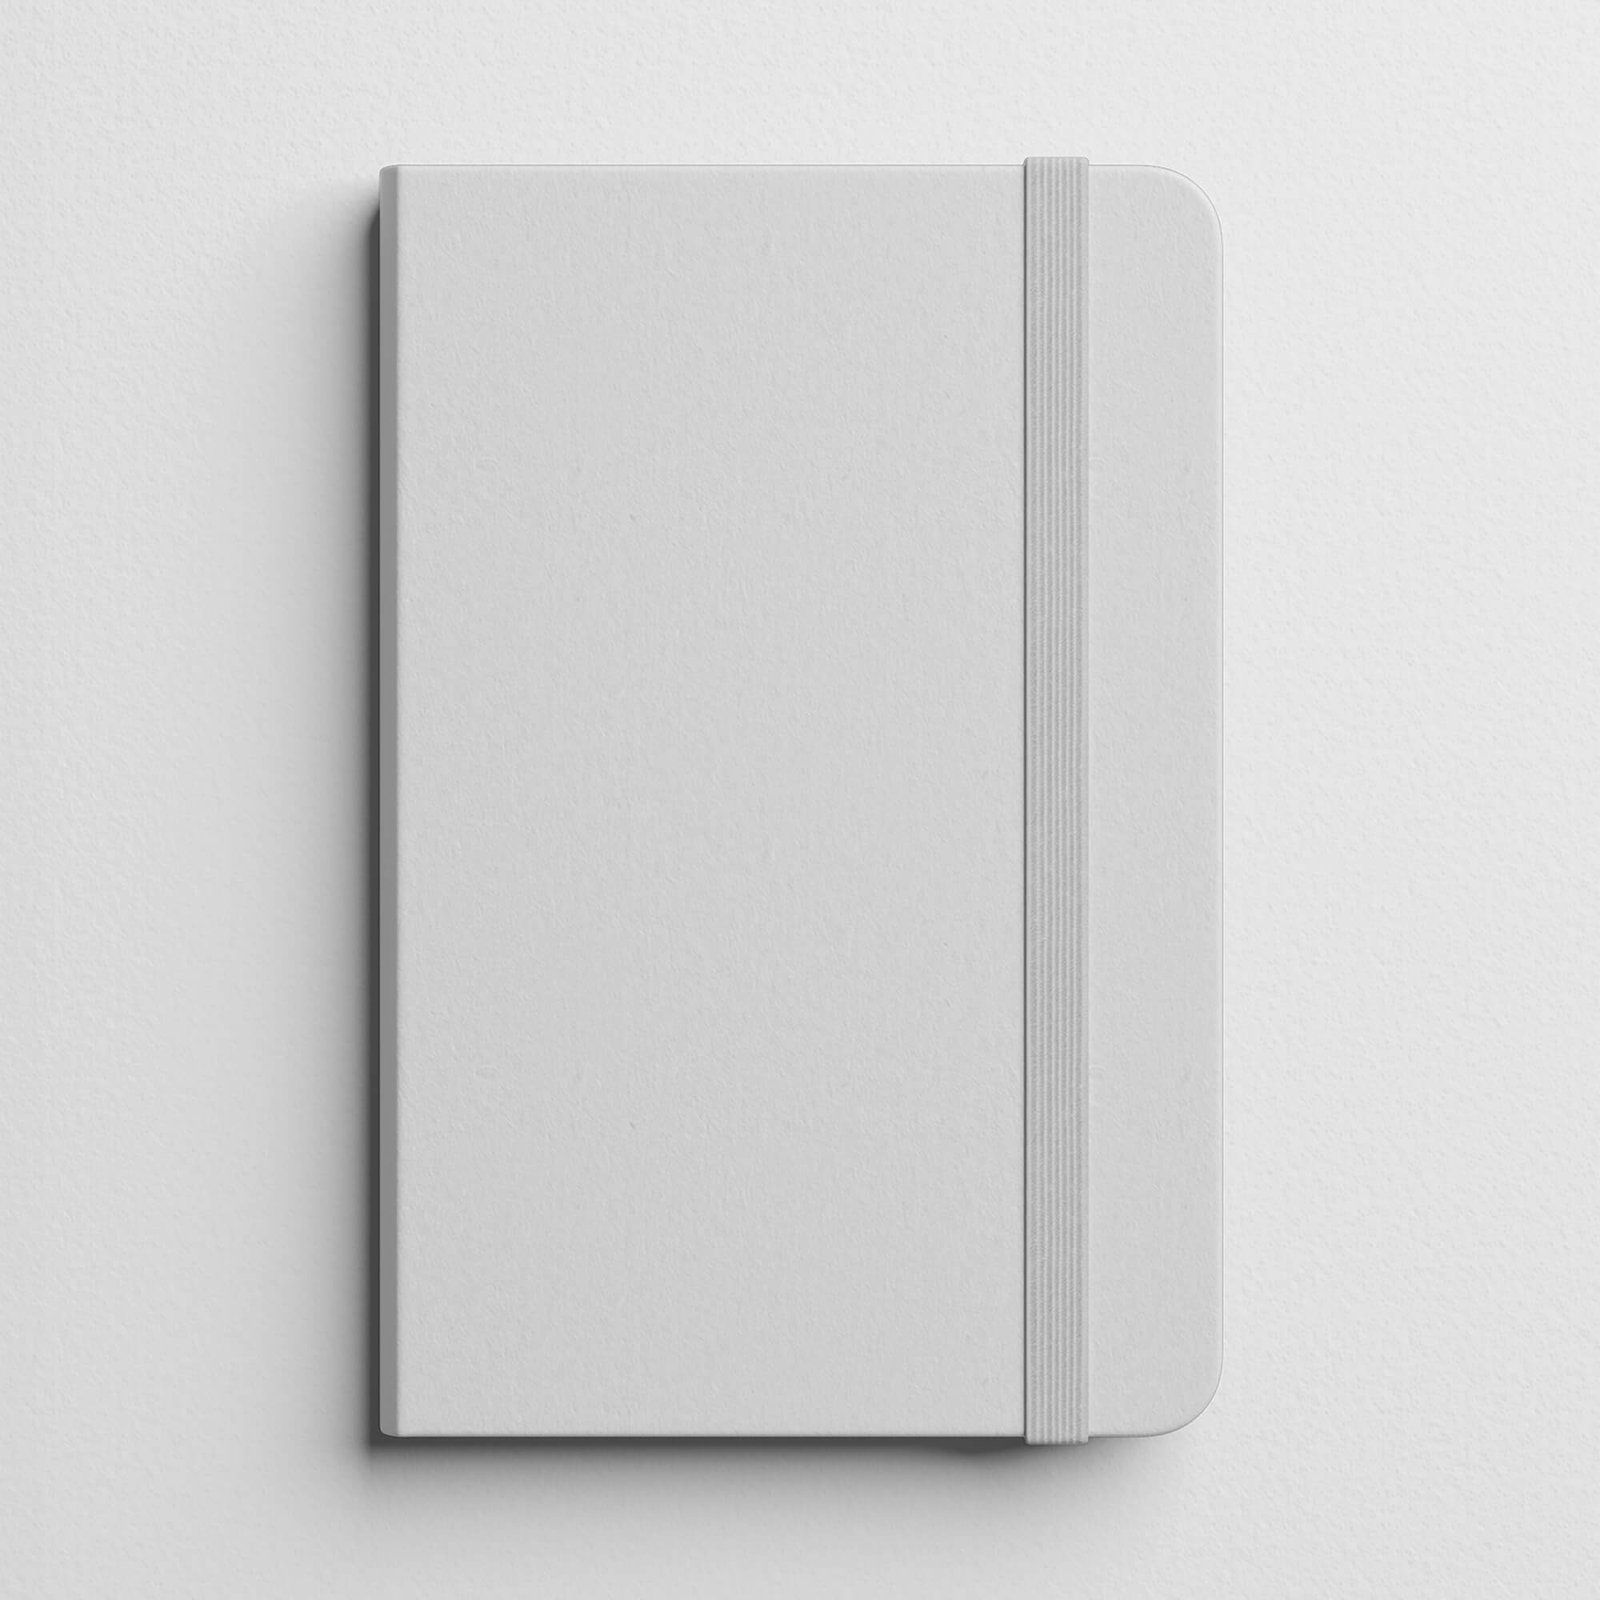 Blank Free Notebook Cover Mockup PSD Template